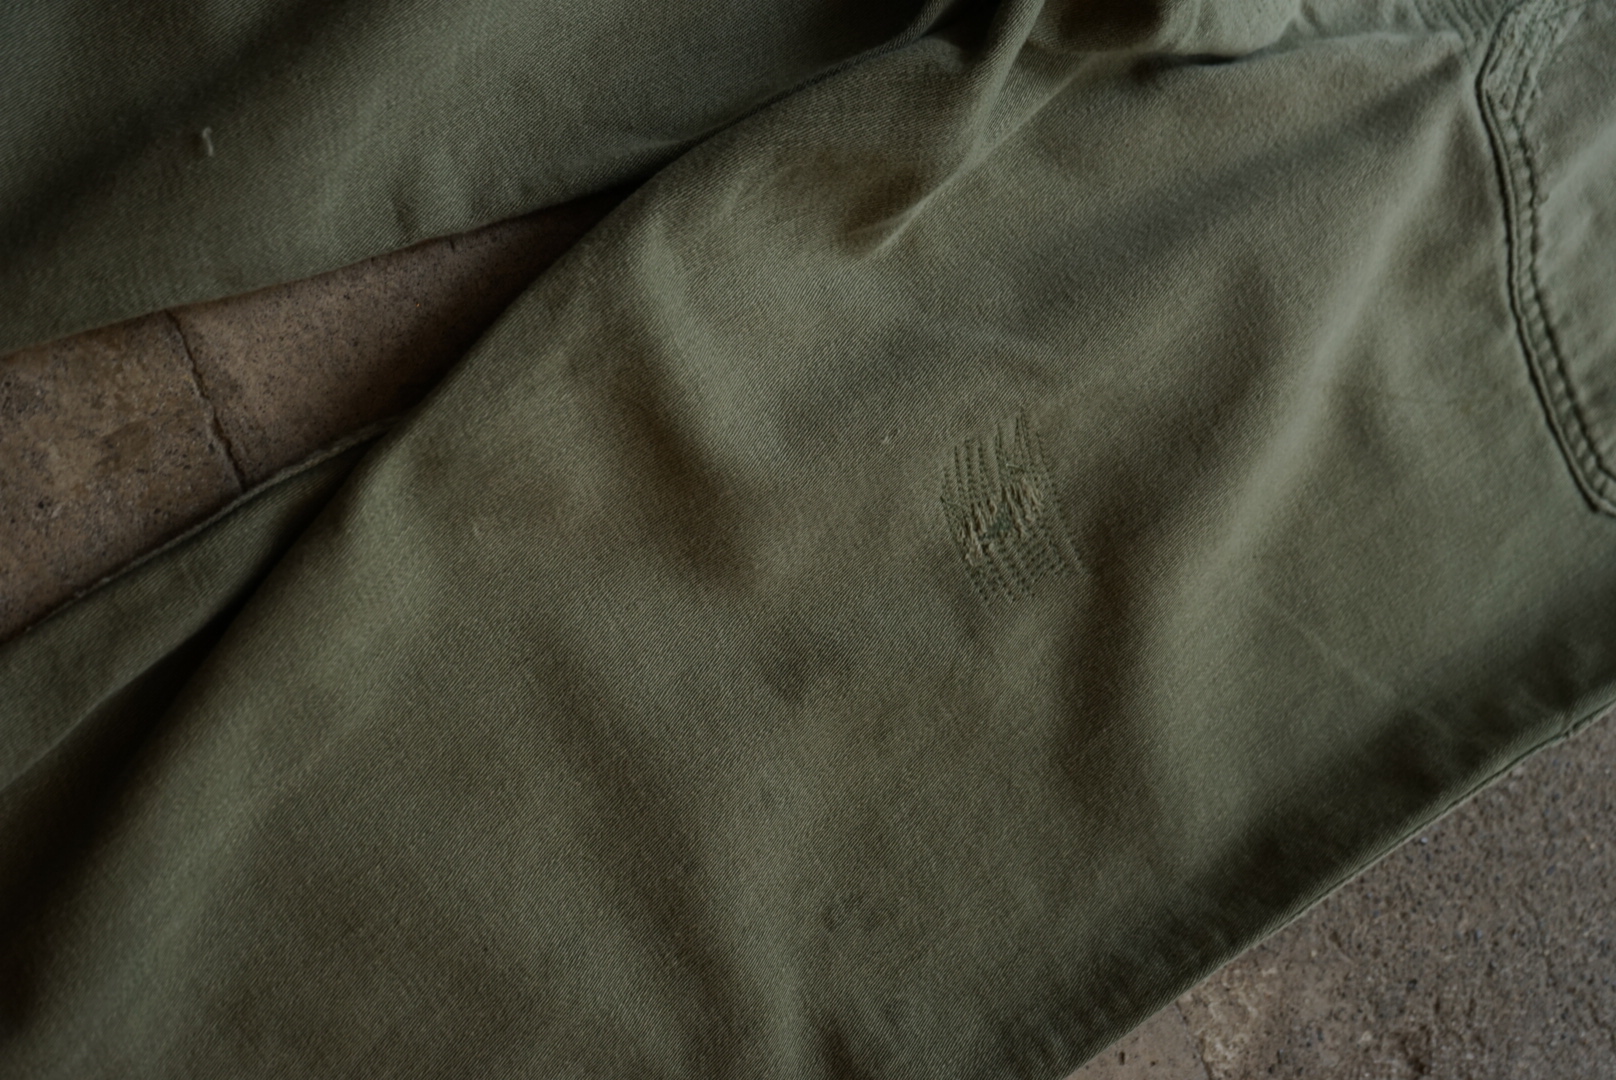 US ARMY BAKER PANTS REPAIRED 08